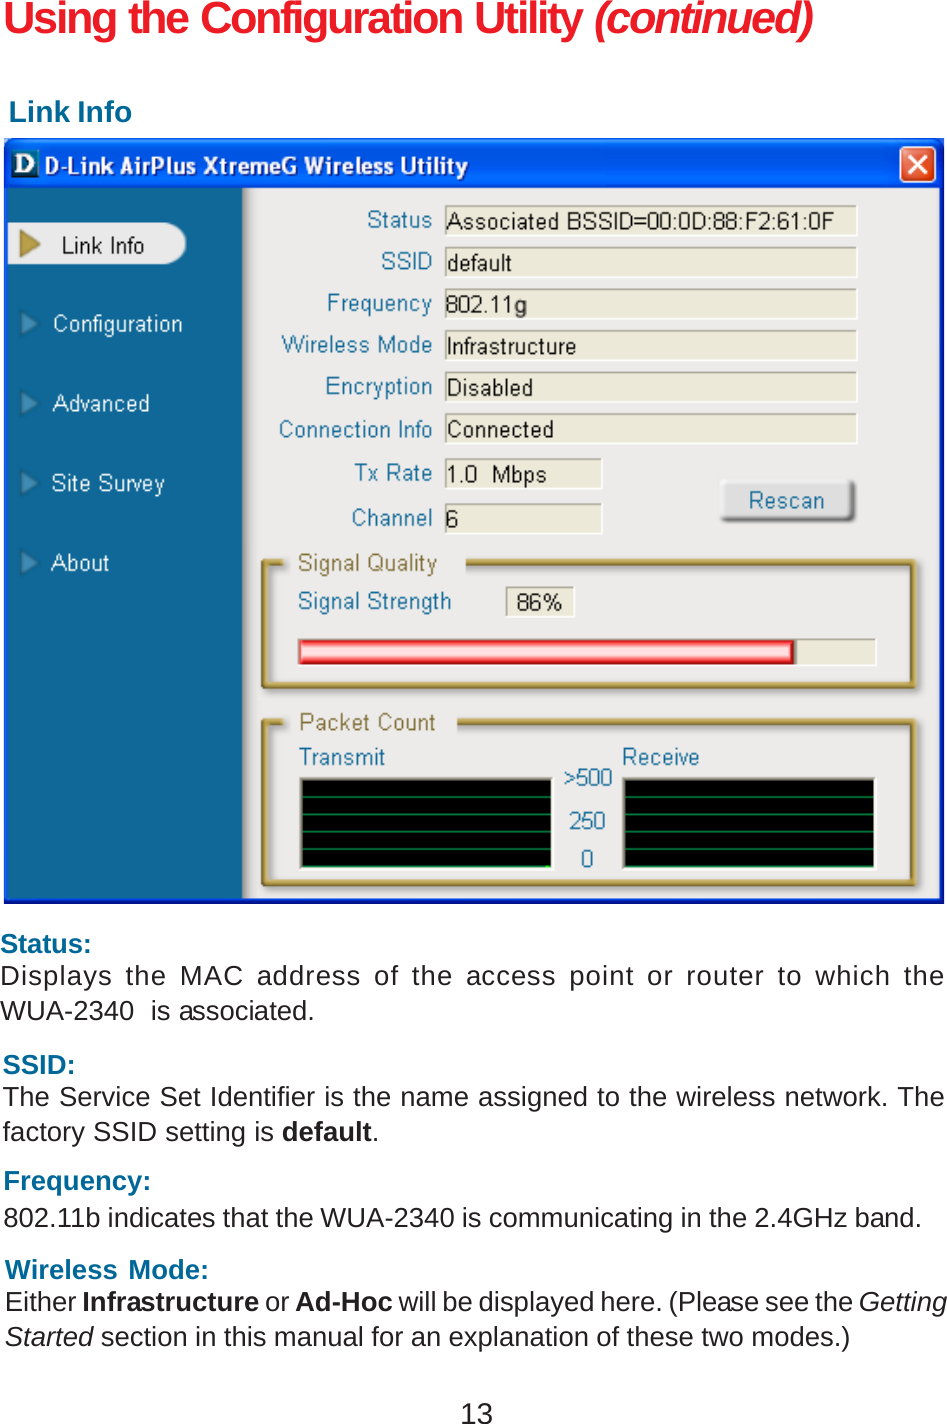 13Using the Configuration Utility (continued)Link InfoSSID:The Service Set Identifier is the name assigned to the wireless network. Thefactory SSID setting is default.Status:Displays the MAC address of the access point or router to which theWUA-2340  is associated.Frequency:802.11b indicates that the WUA-2340 is communicating in the 2.4GHz band.Wireless Mode:Either Infrastructure or Ad-Hoc will be displayed here. (Please see the GettingStarted section in this manual for an explanation of these two modes.)